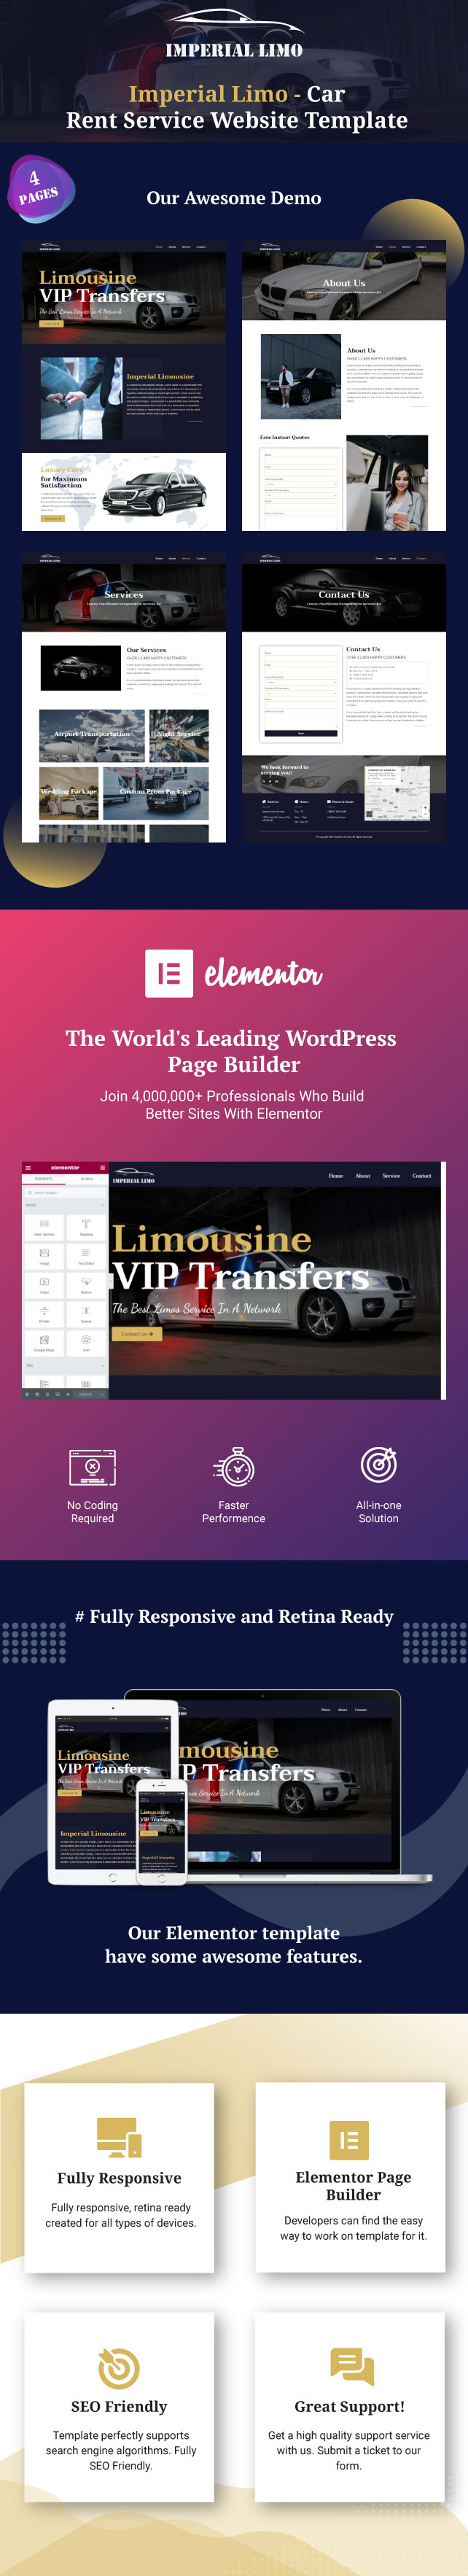 imperial-limo-car-rent-service-website-template